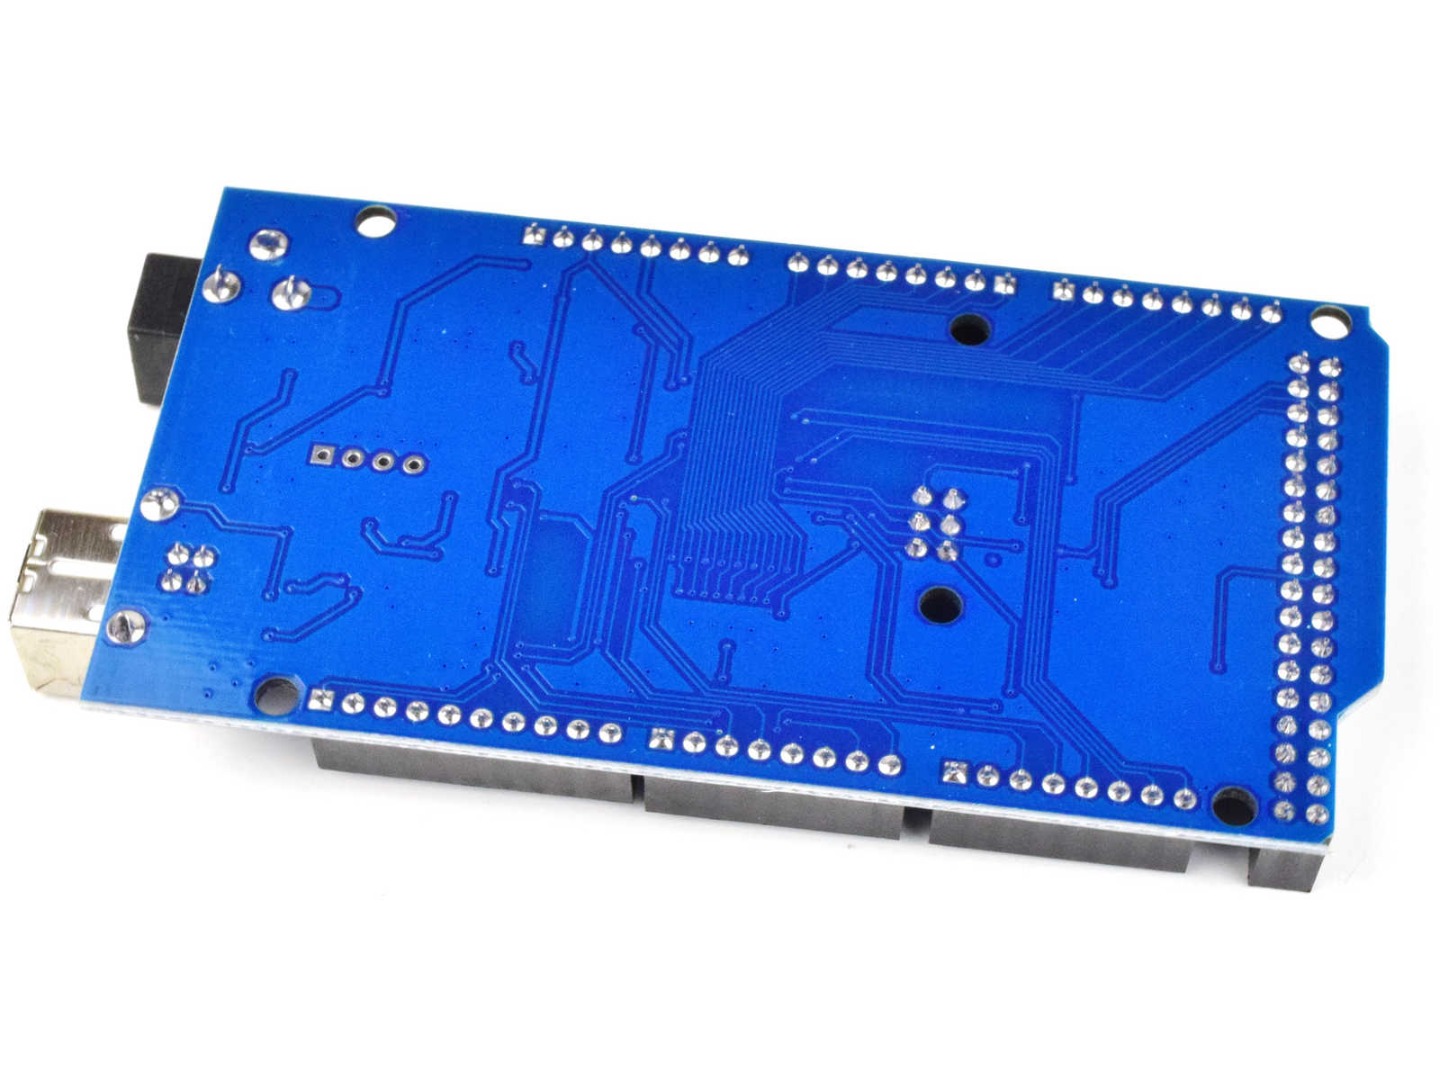 MEGA 2560 R3 module with Atmega2560 + CH340 USB (100% compatible with Arduino) 9